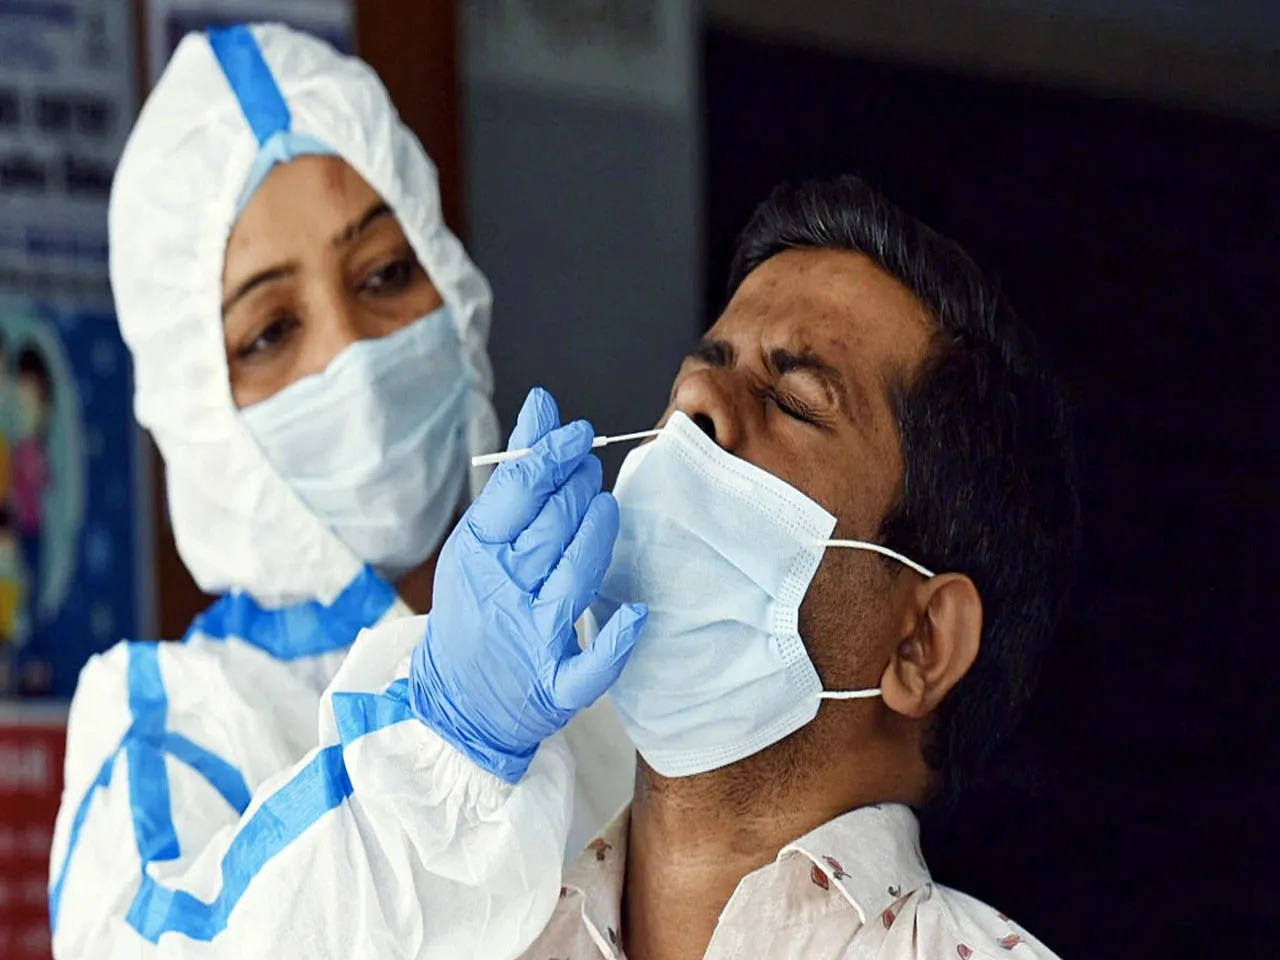 752 people have been infected with Covid, India reported 4 deaths